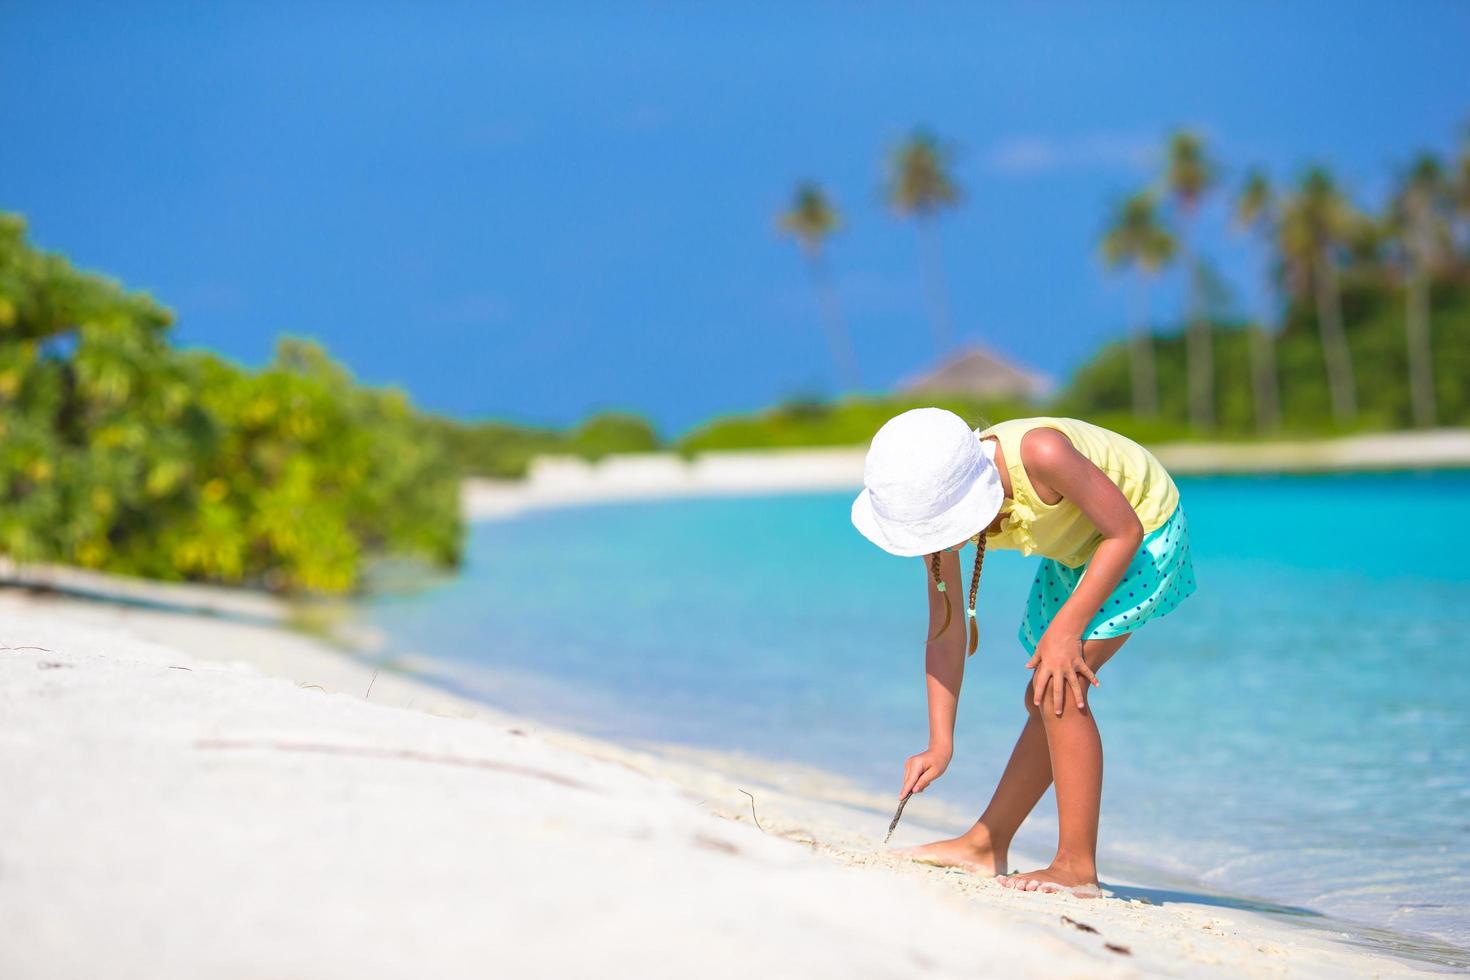 Girl playing in white sand photo